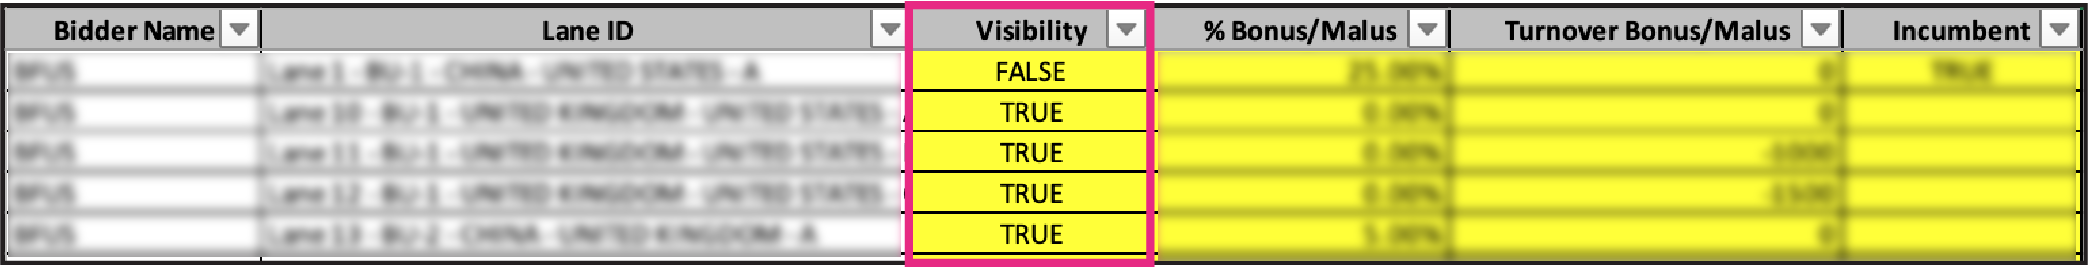 Configuring lot visibility in Excel